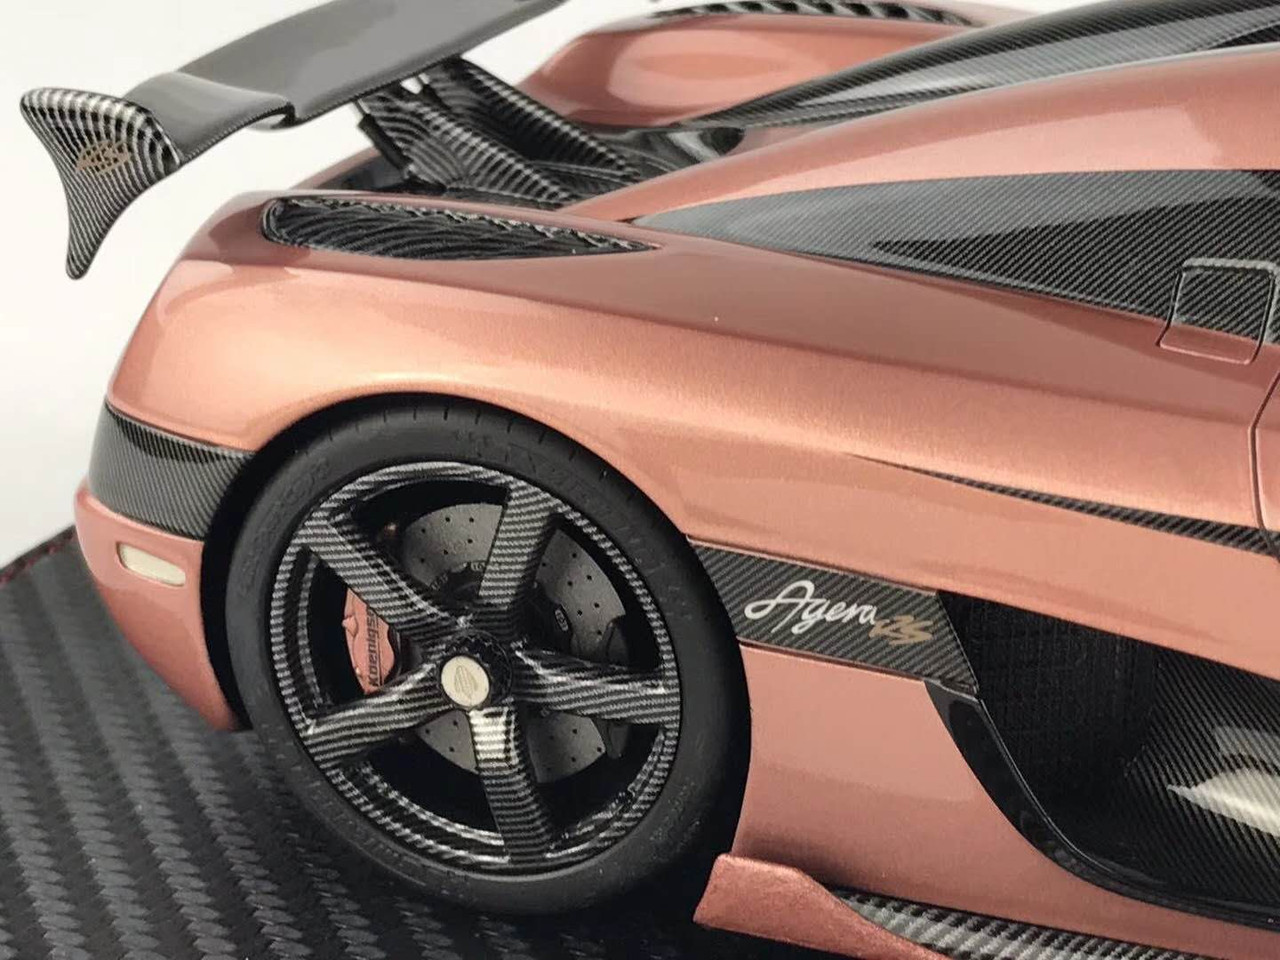 1/18 FA Frontiart Koenigsegg Agera RS (Taipei Gold) Resin Car Model Limited